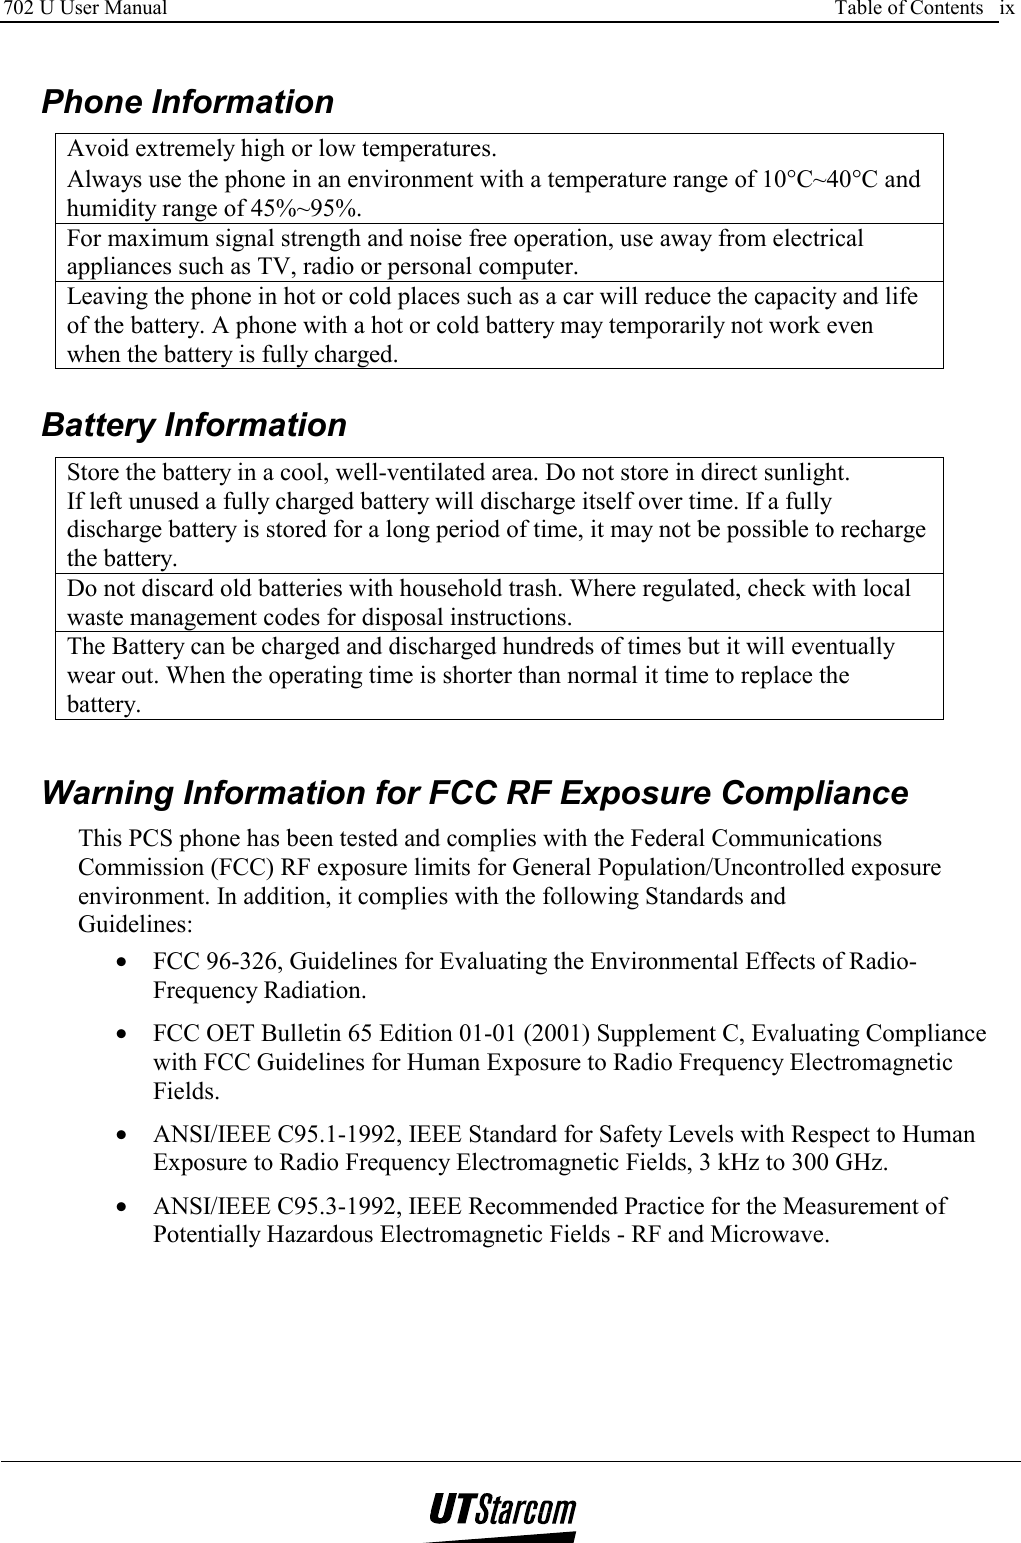 702 U User Manual      Table of Contents   ix     Phone Information Avoid extremely high or low temperatures. Always use the phone in an environment with a temperature range of 10°C~40°C and humidity range of 45%~95%. For maximum signal strength and noise free operation, use away from electrical appliances such as TV, radio or personal computer. Leaving the phone in hot or cold places such as a car will reduce the capacity and life of the battery. A phone with a hot or cold battery may temporarily not work even when the battery is fully charged.   Battery Information Store the battery in a cool, well-ventilated area. Do not store in direct sunlight. If left unused a fully charged battery will discharge itself over time. If a fully discharge battery is stored for a long period of time, it may not be possible to recharge the battery. Do not discard old batteries with household trash. Where regulated, check with local waste management codes for disposal instructions. The Battery can be charged and discharged hundreds of times but it will eventually wear out. When the operating time is shorter than normal it time to replace the battery.    Warning Information for FCC RF Exposure Compliance This PCS phone has been tested and complies with the Federal Communications Commission (FCC) RF exposure limits for General Population/Uncontrolled exposure environment. In addition, it complies with the following Standards and Guidelines: •  FCC 96-326, Guidelines for Evaluating the Environmental Effects of Radio-Frequency Radiation. •  FCC OET Bulletin 65 Edition 01-01 (2001) Supplement C, Evaluating Compliance with FCC Guidelines for Human Exposure to Radio Frequency Electromagnetic Fields. •  ANSI/IEEE C95.1-1992, IEEE Standard for Safety Levels with Respect to Human Exposure to Radio Frequency Electromagnetic Fields, 3 kHz to 300 GHz. •  ANSI/IEEE C95.3-1992, IEEE Recommended Practice for the Measurement of Potentially Hazardous Electromagnetic Fields - RF and Microwave.  